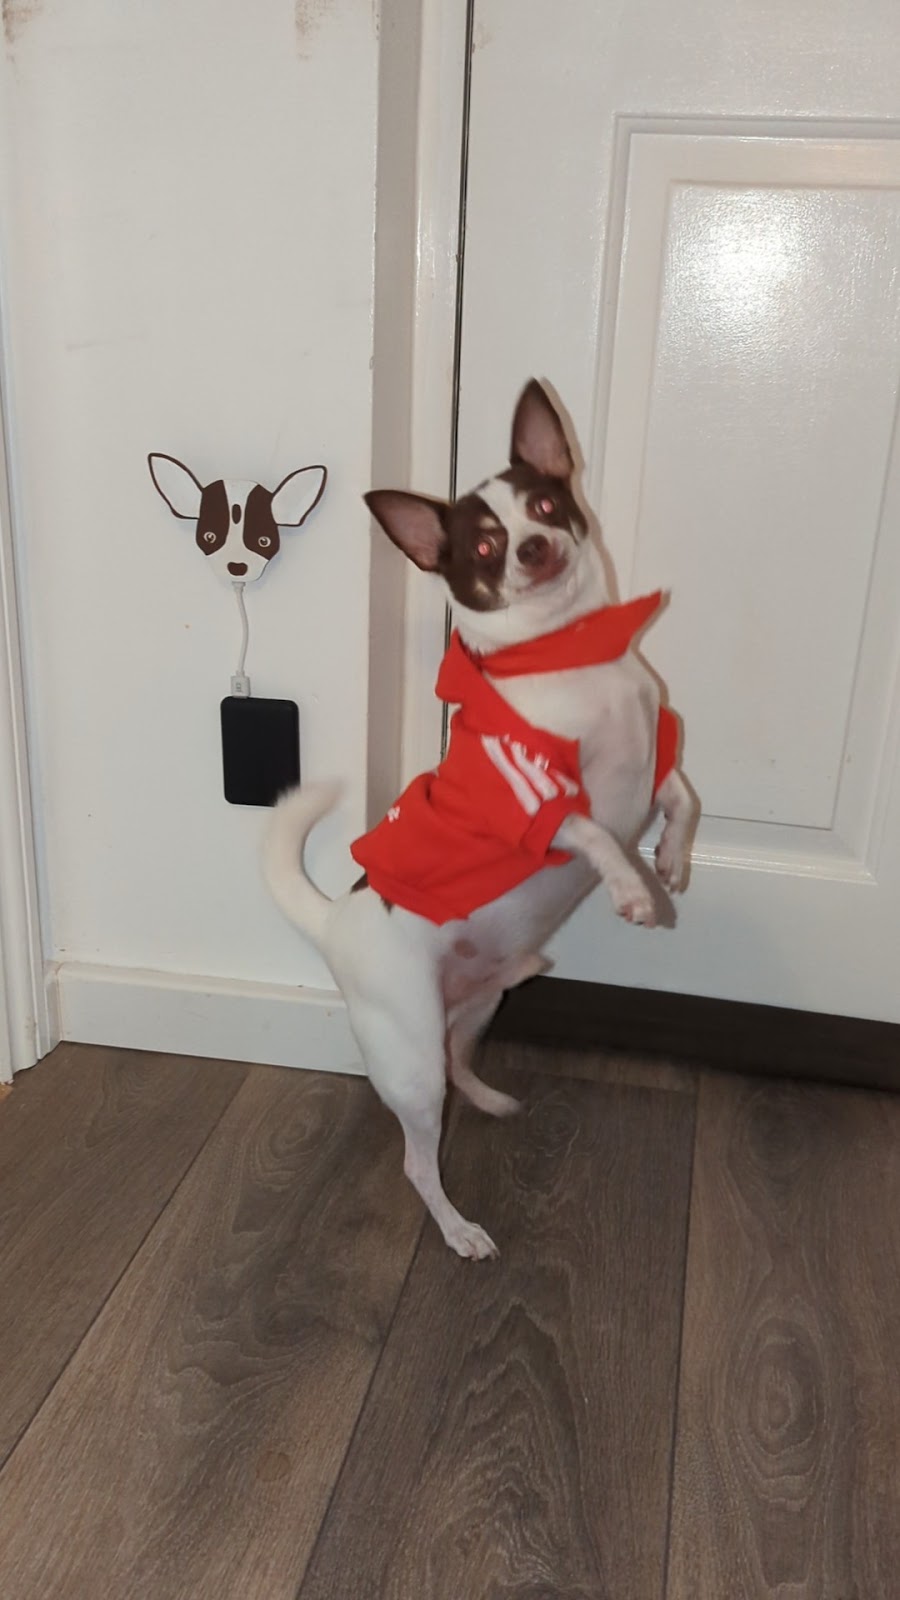 Bobby the Chihuahua on his hind legs standing by the front door with the mounted ESP32 and battery pack